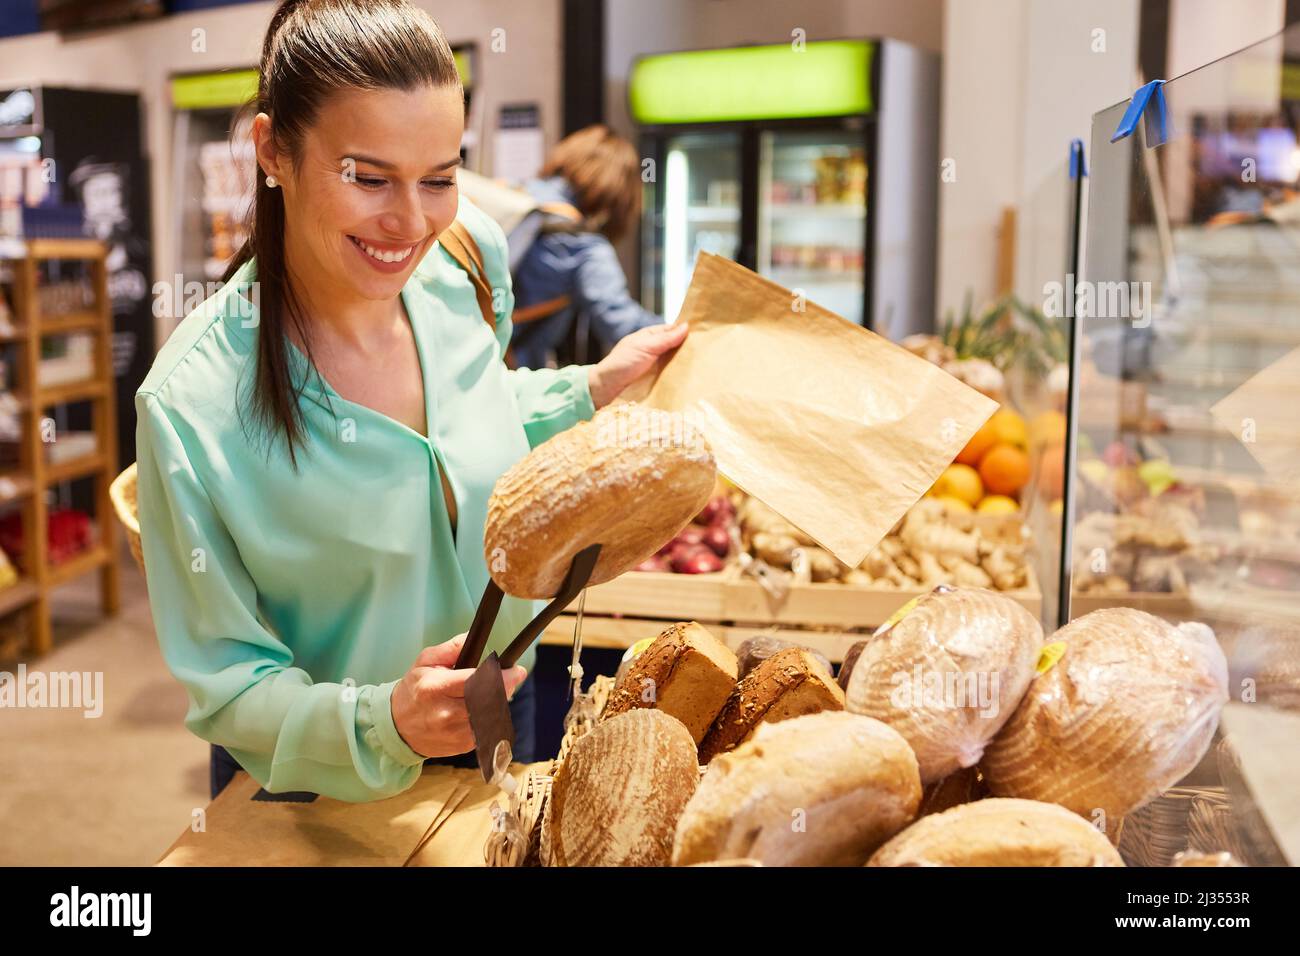 Young woman as a happy customer buying bread as self-service in the supermarket Stock Photo